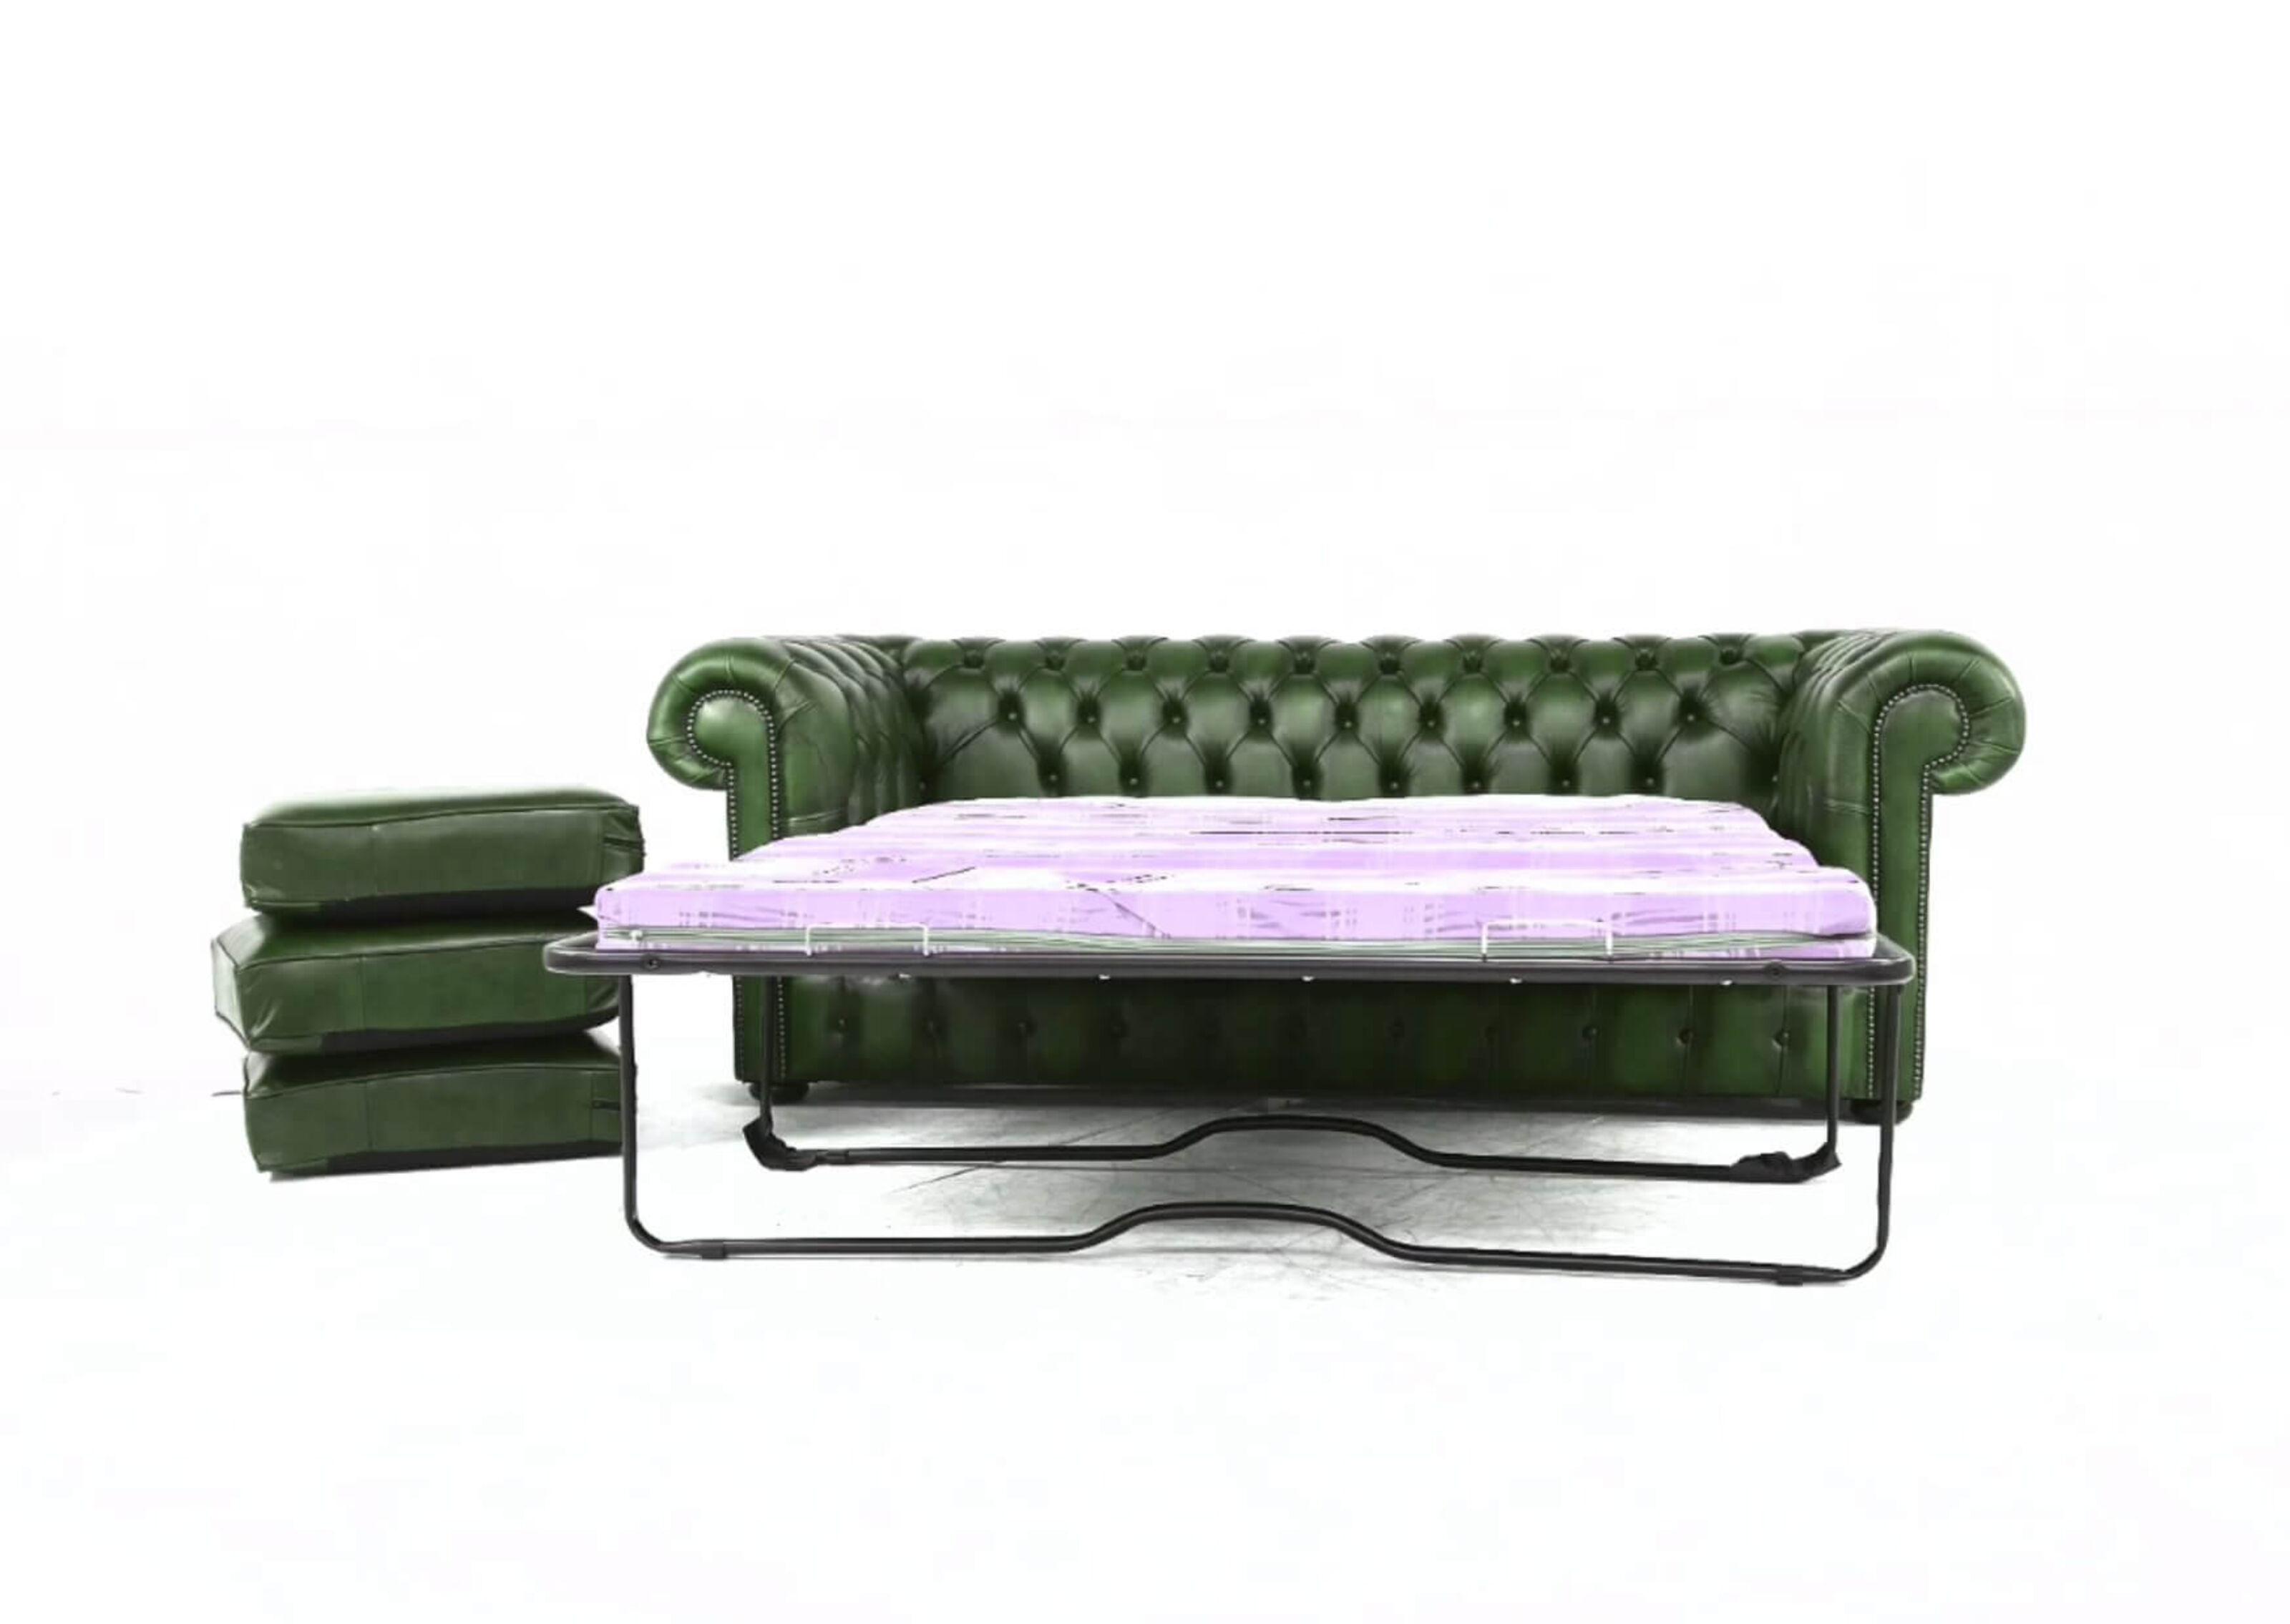 Level Up Your Living Space with DesignerSofas4u's Chesterfield Sofa Bed  %Post Title